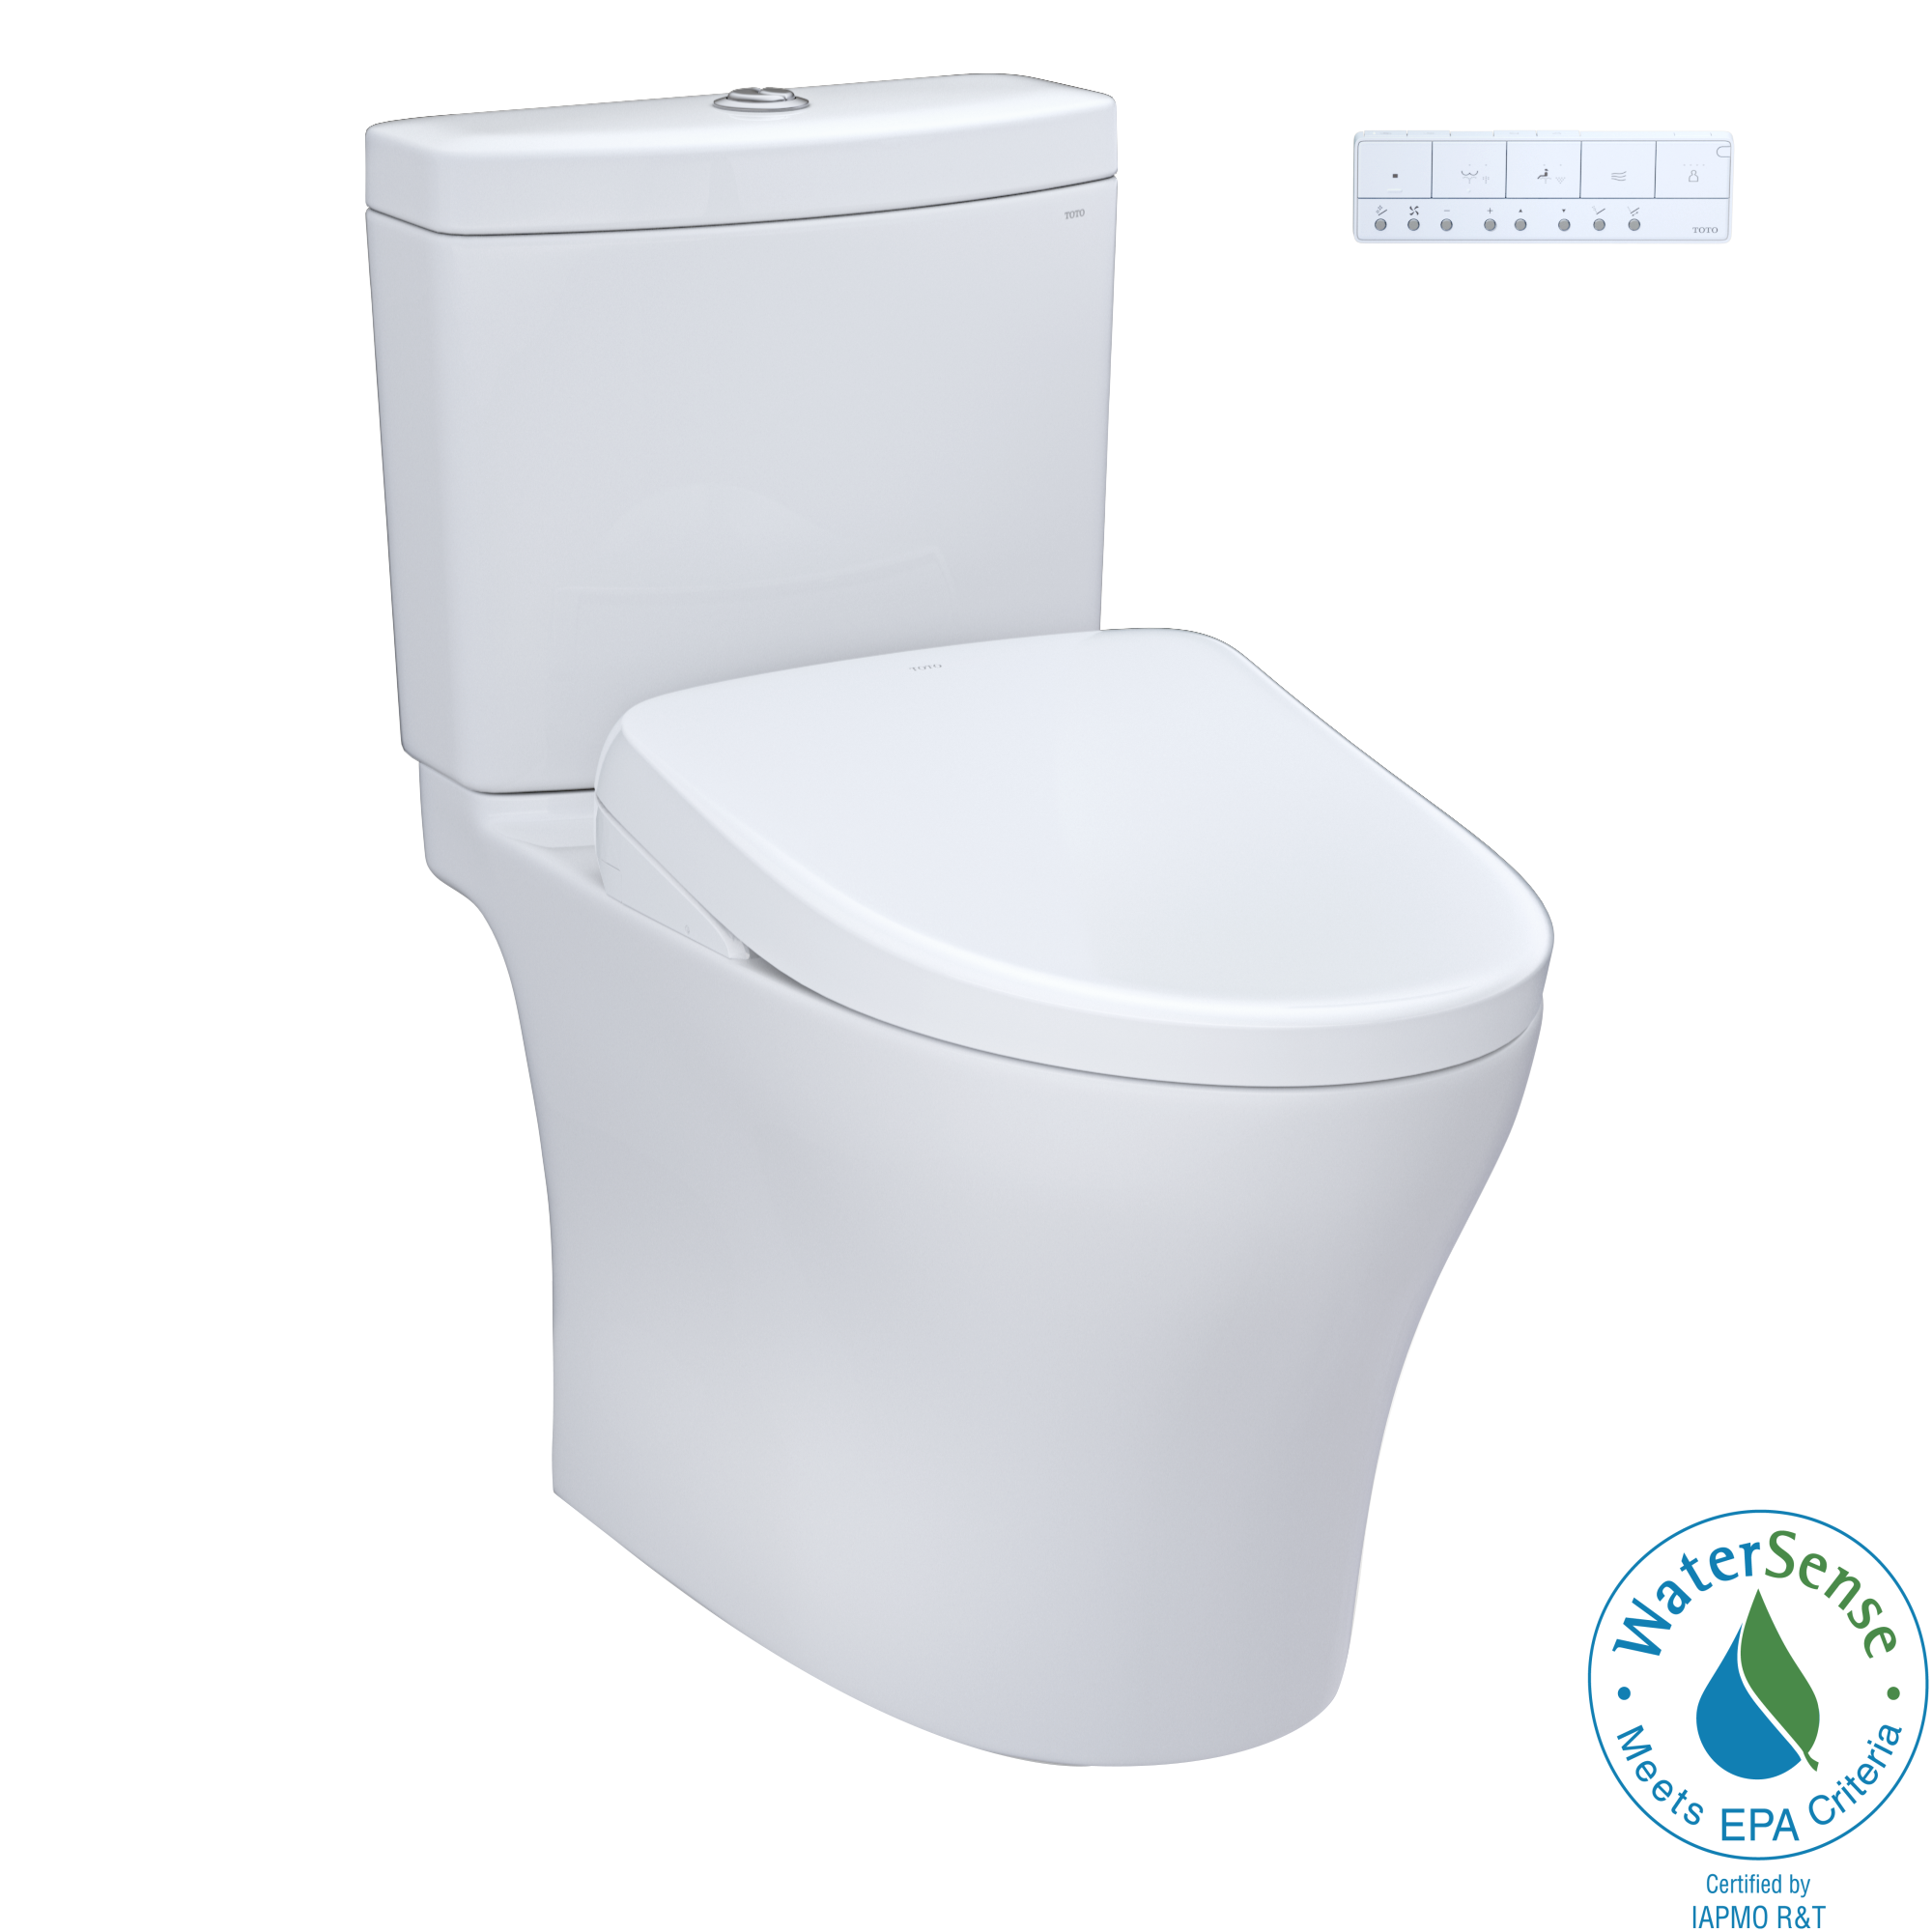 TOTO WASHLET+ Aquia IV Two-Piece Elongated Dual Flush 1.28 and 0.9 GPF Toilet with S7 Contemporary Bidet Seat, Cotton White - MW4464726CEMFGN#01, MW4464726CEMFGNA#01